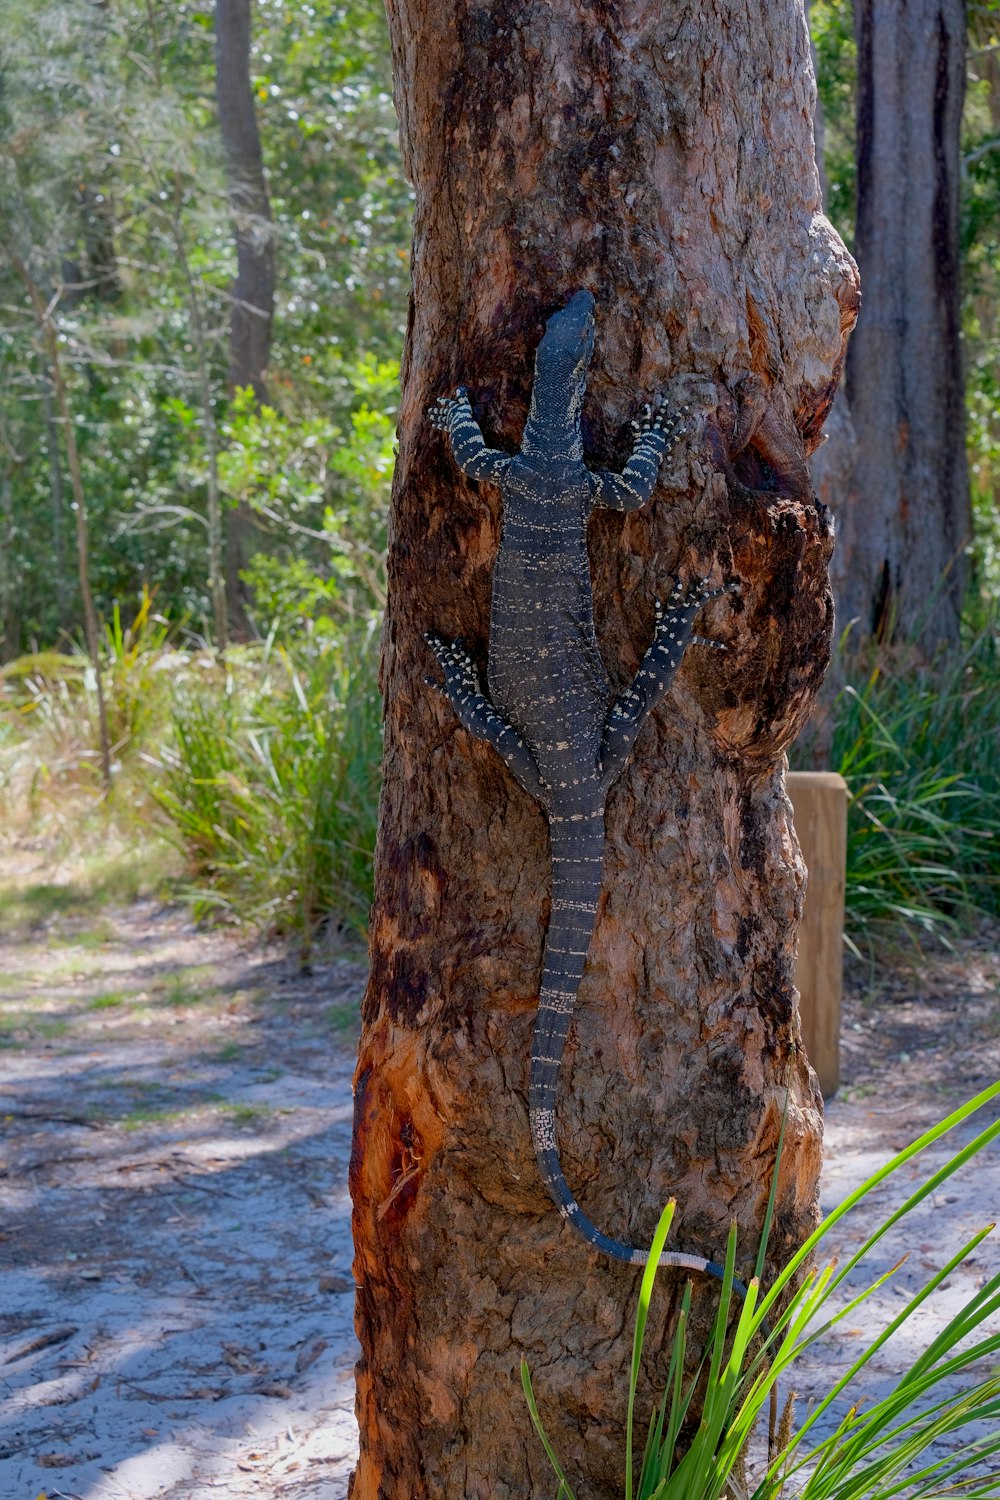 a lizard is climbing up the side of a tree